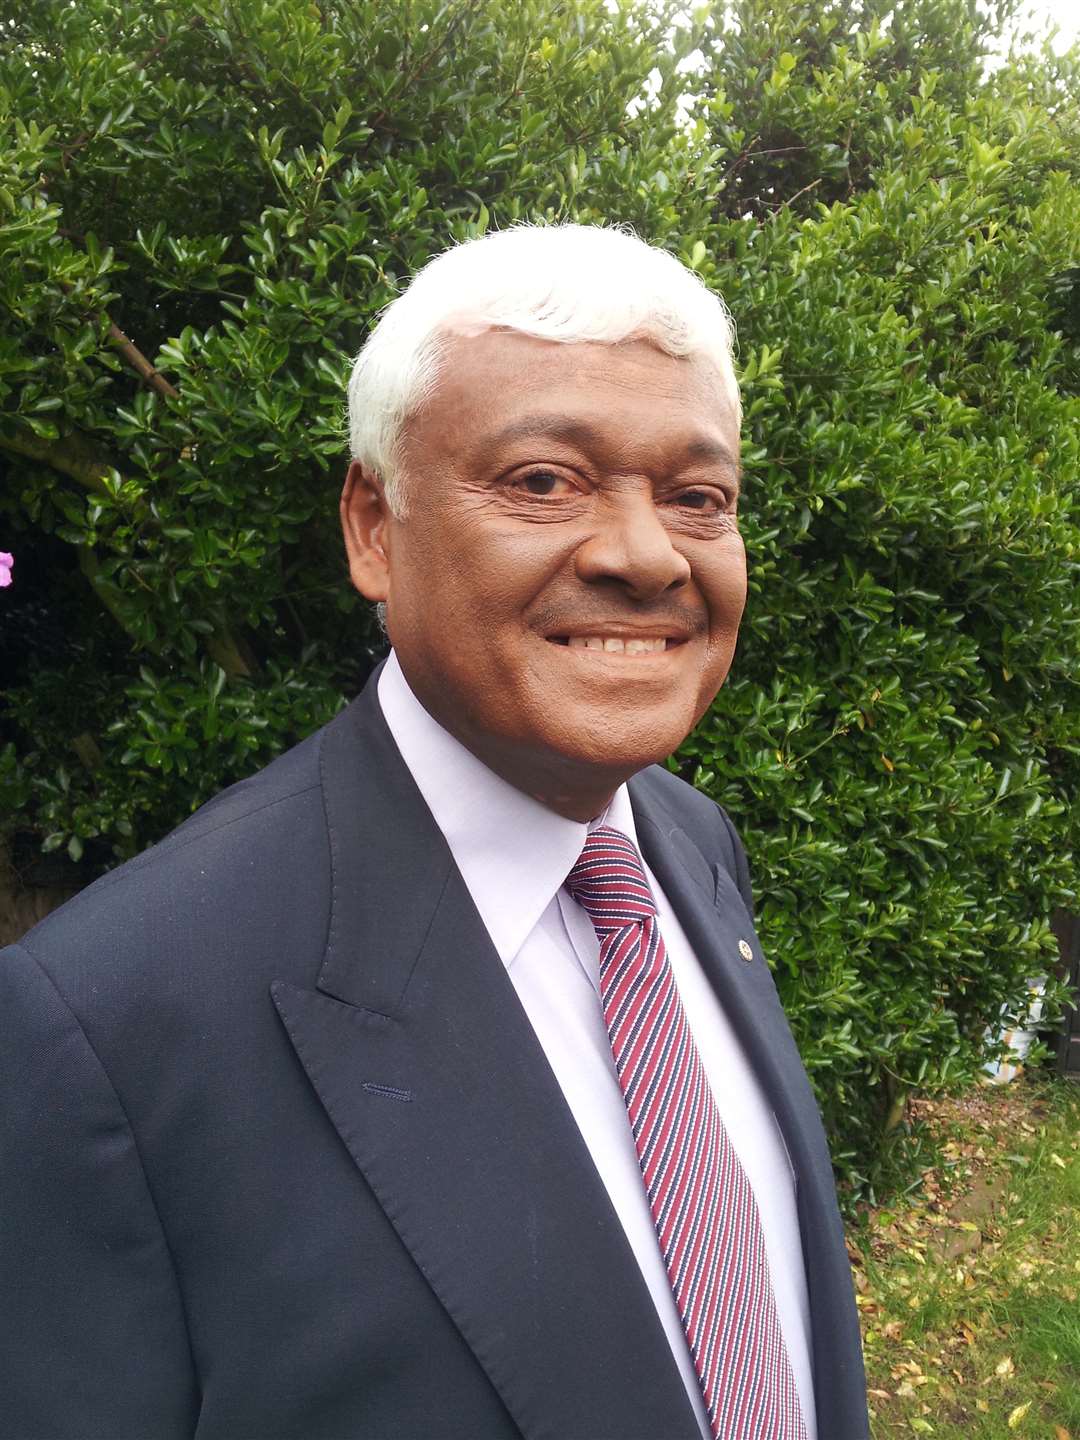 Former Mayor of Medway Dai Liyanage launched a blistering personal attack on a council officer